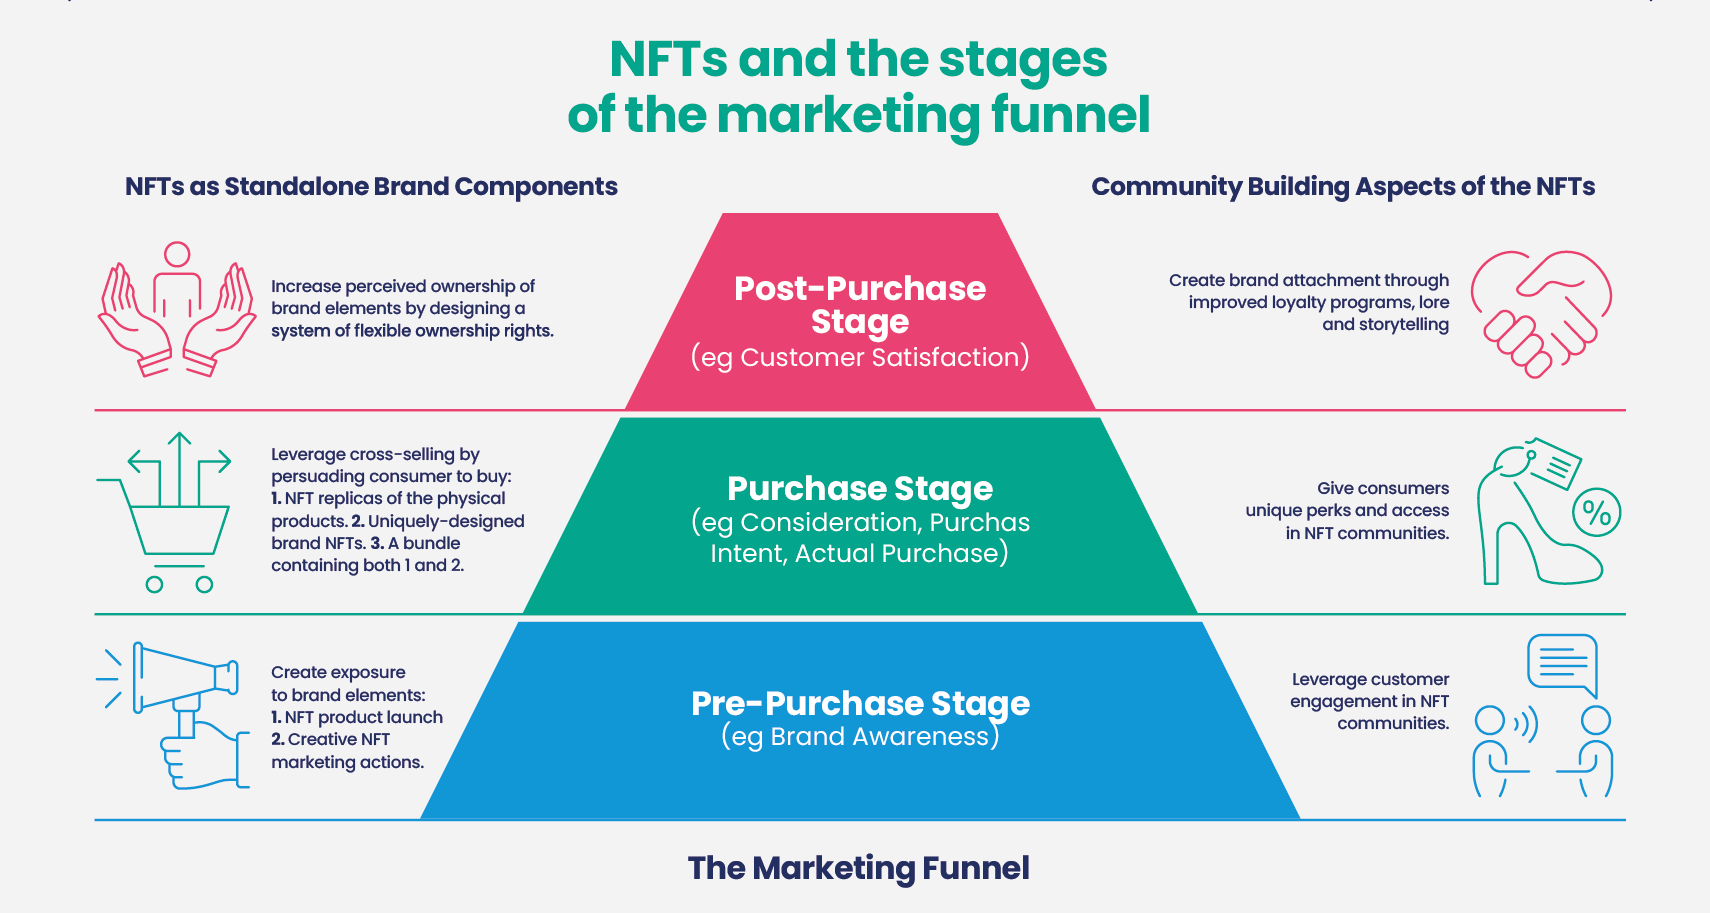 How can NFTs bring value to brands? - Marketing funnel